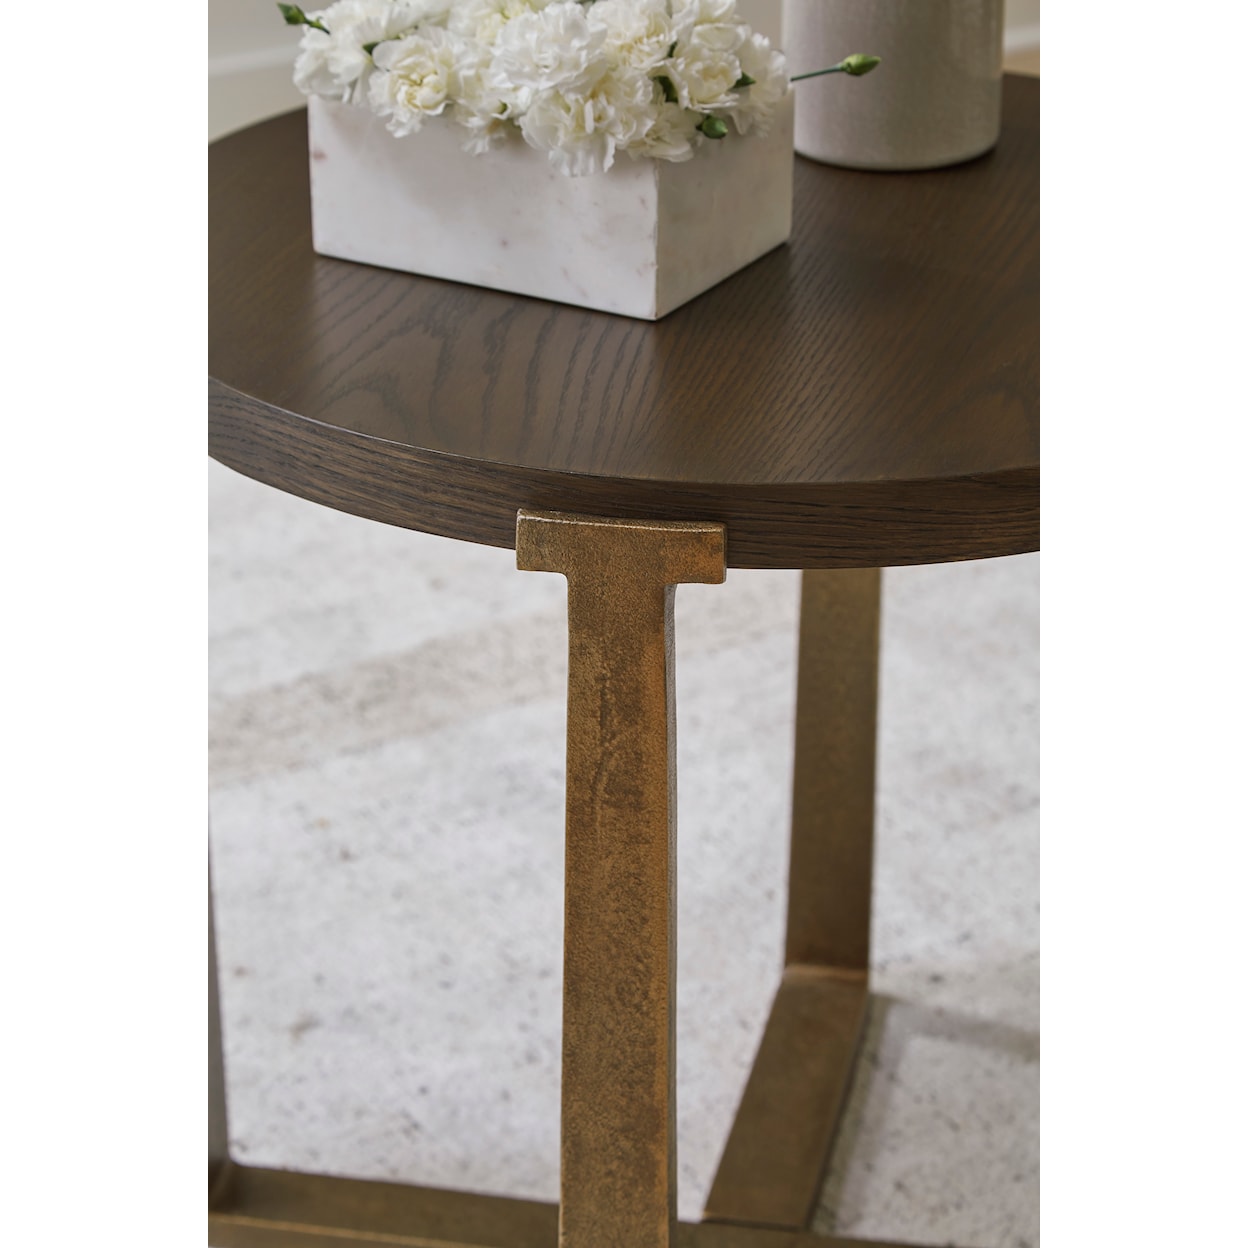 Signature Design by Ashley Balintmore End Table